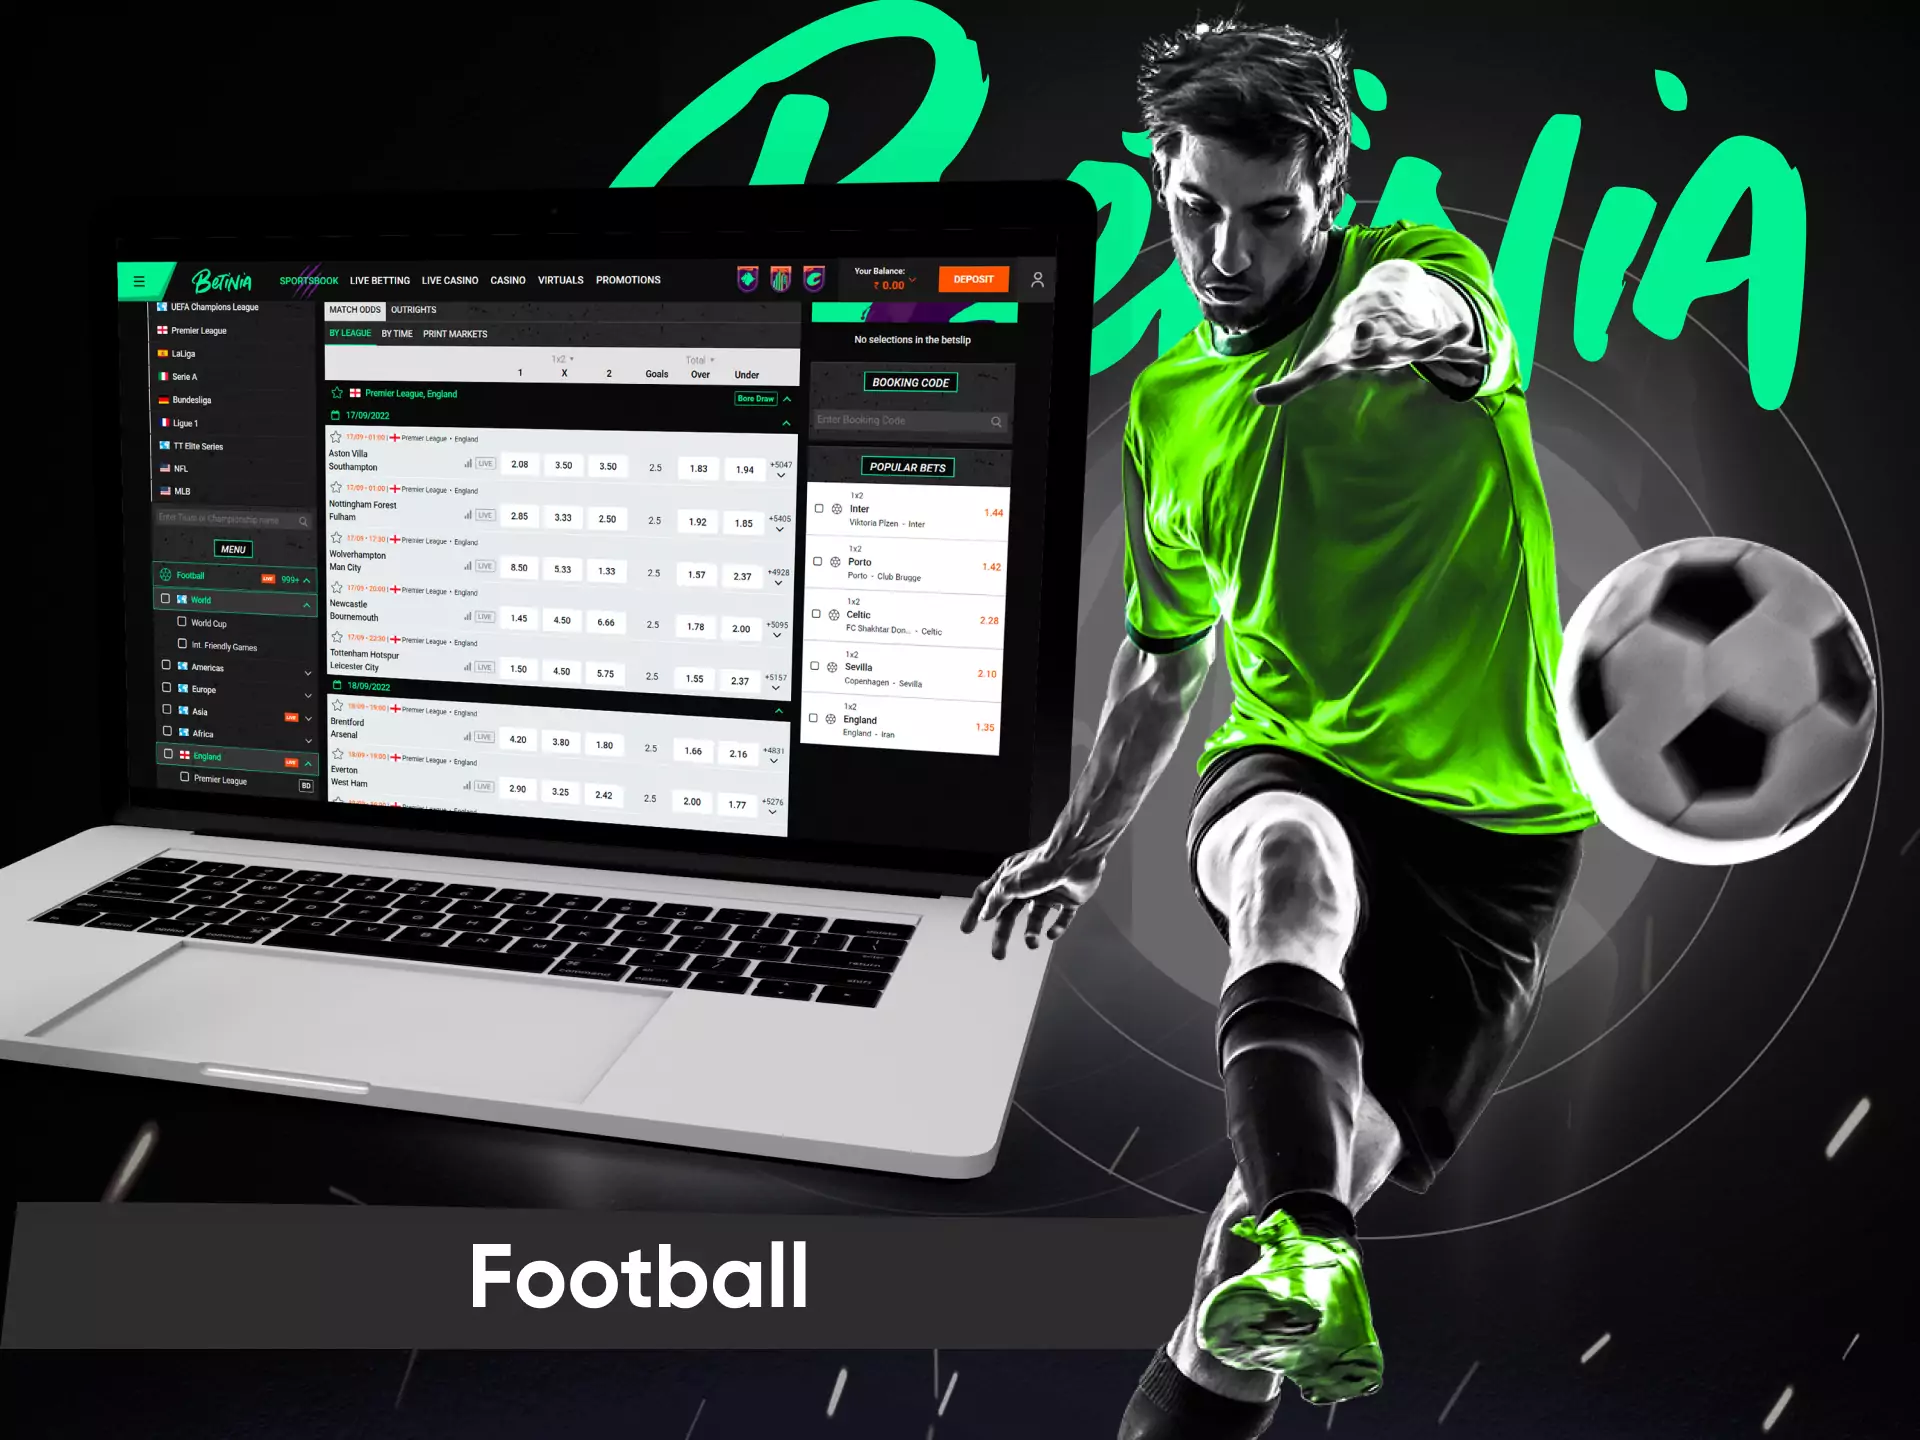 Football betting is the most popular activity in the Betinia sportsbook.